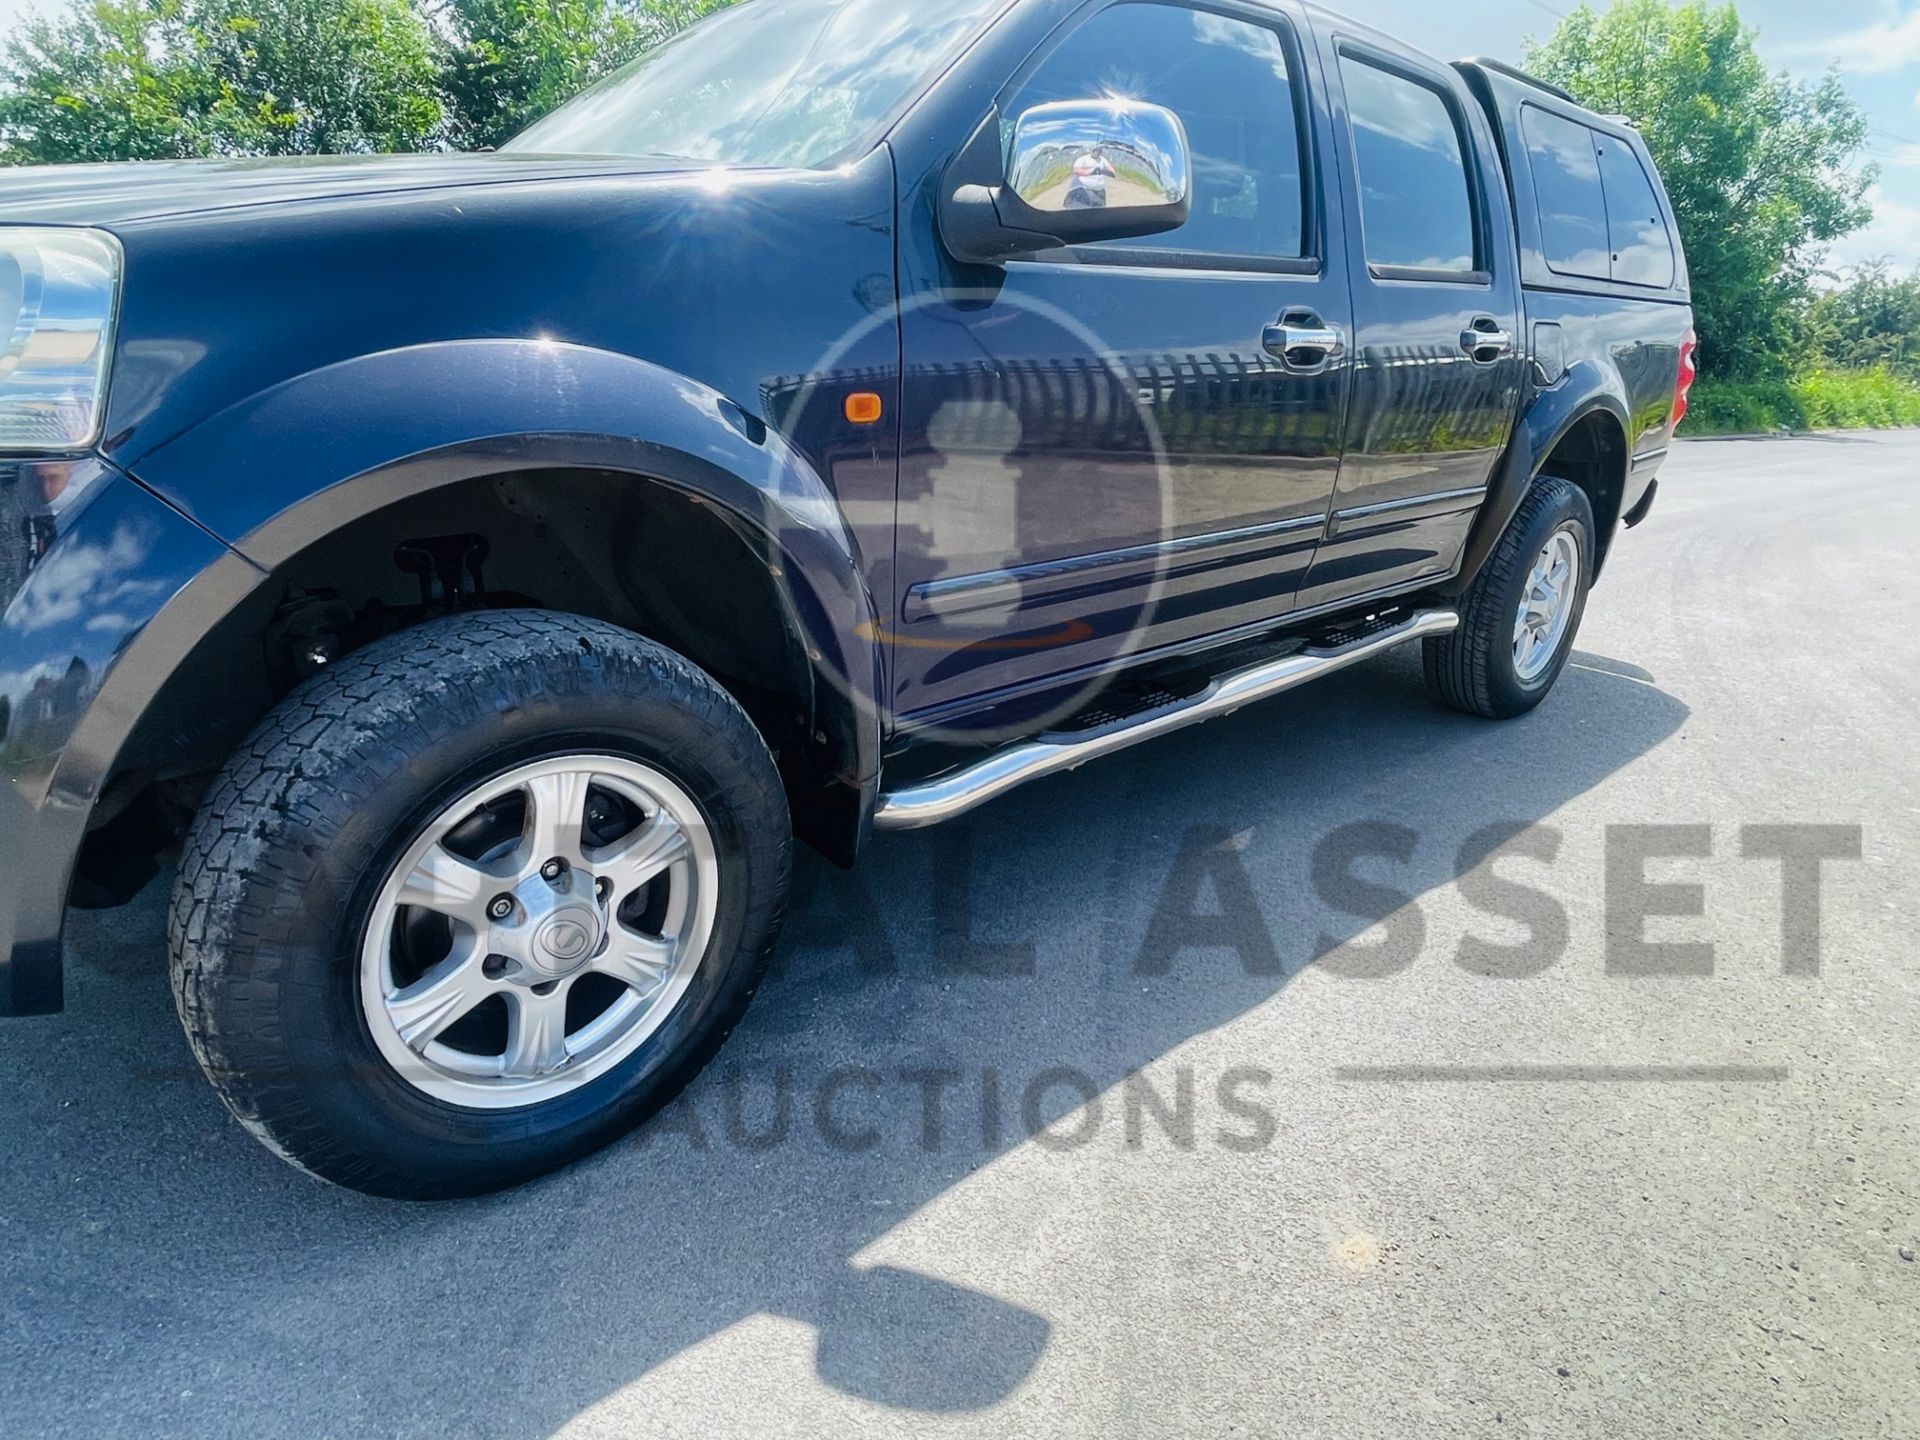 (On Sale) GREAT WALL STEED *SE* 4X4 DOUBLE CAB PICK-UP (2012) 2.0 DIESEL - 6 SPEED *HUGE SPEC* - Image 18 of 45